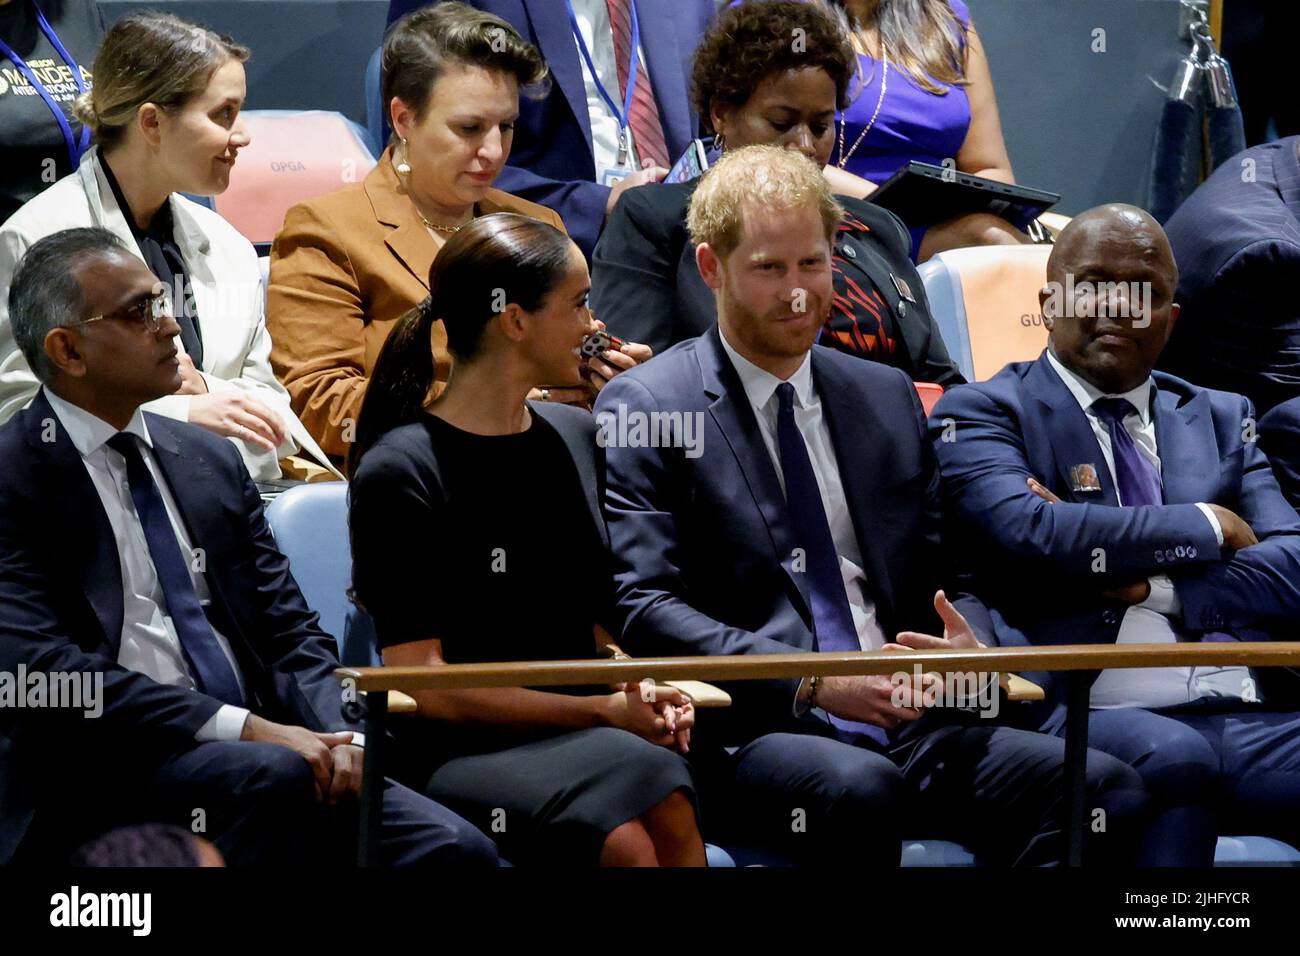 Britain's Prince Harry and his wife Meghan, Duchess of Sussex, attend the United Nations General Assembly celebration of Nelson Mandela International Day at United Nations Headquarters in New York, U.S., July 18, 2022. REUTERS/Eduardo Munoz Stock Photo